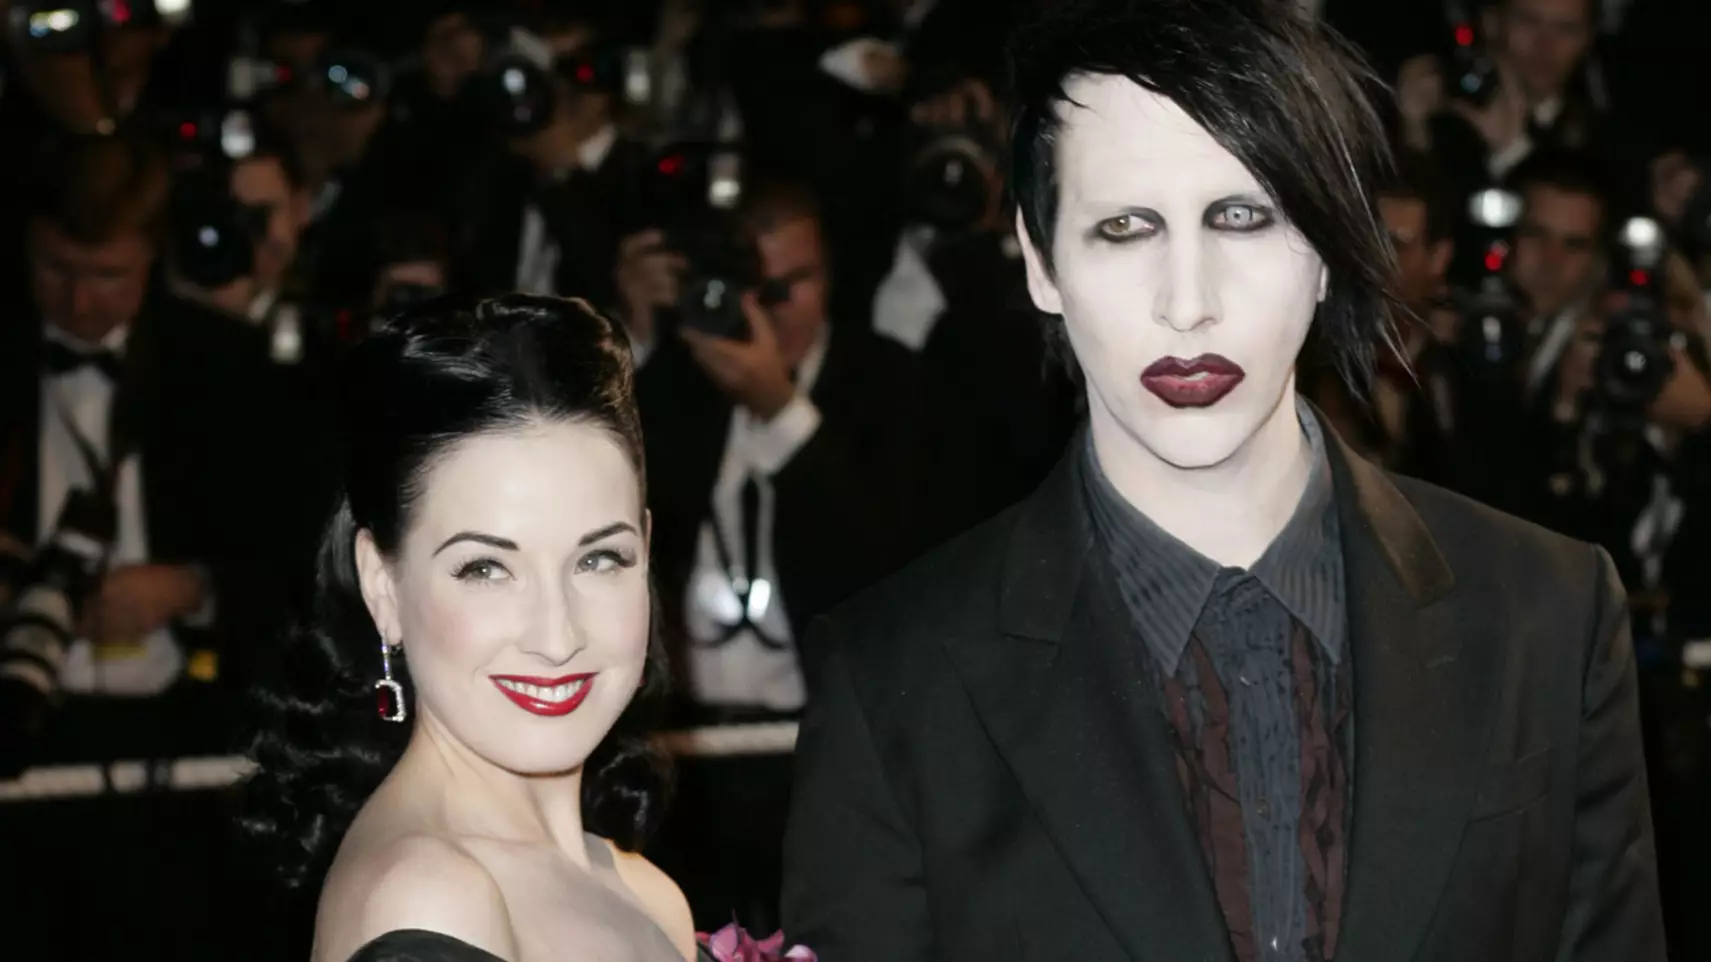 Marilyn Manson’s Ex-Wife Dita Von Teese Speaks Out About Abuse Allegations Against The Singer